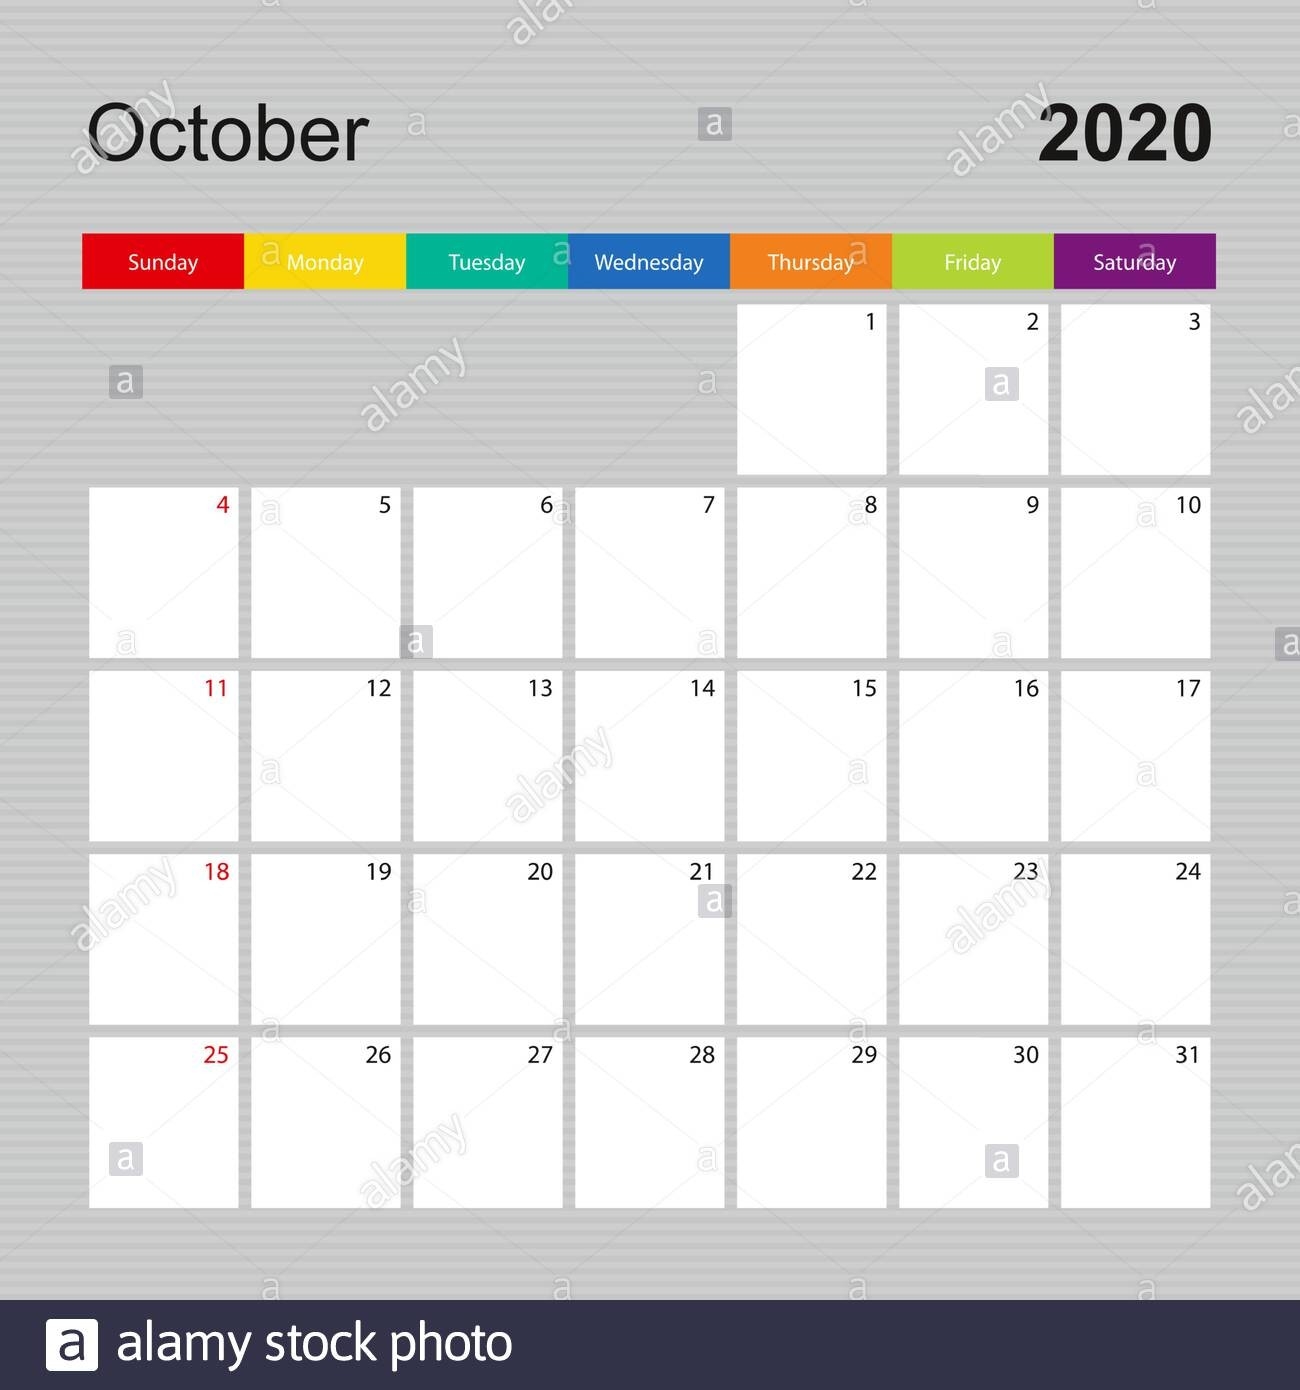 Сalendar Page For October 2020, Wall Planner With Colorful-2020 Wall Calendar Template